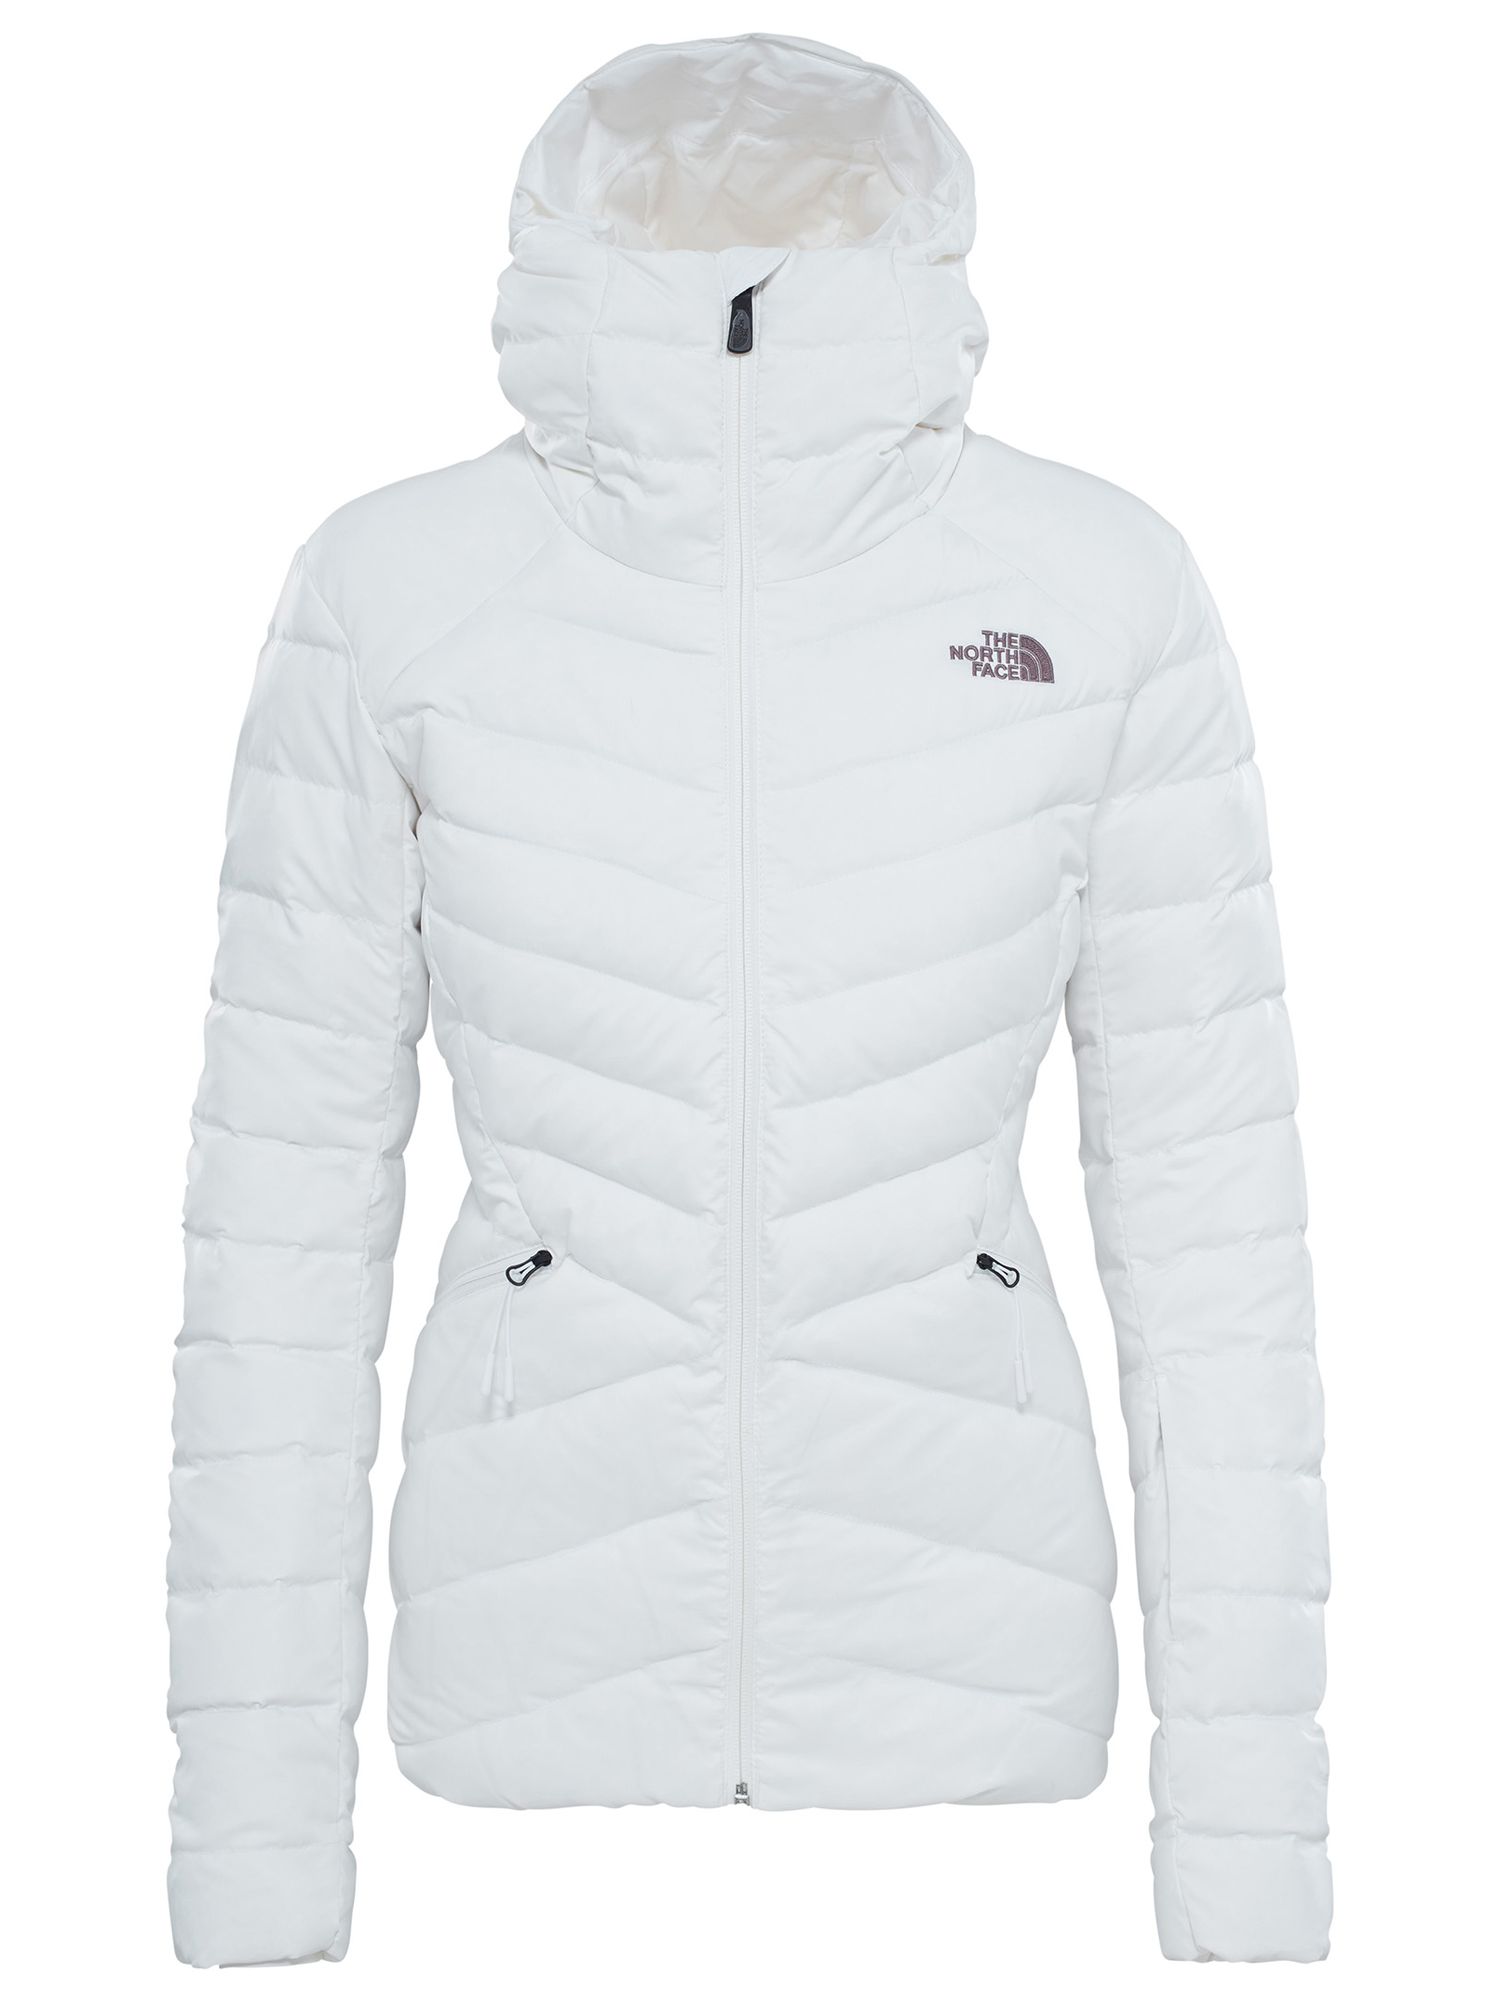 The North Face Womens Moonlight Down Jacket | lupon.gov.ph